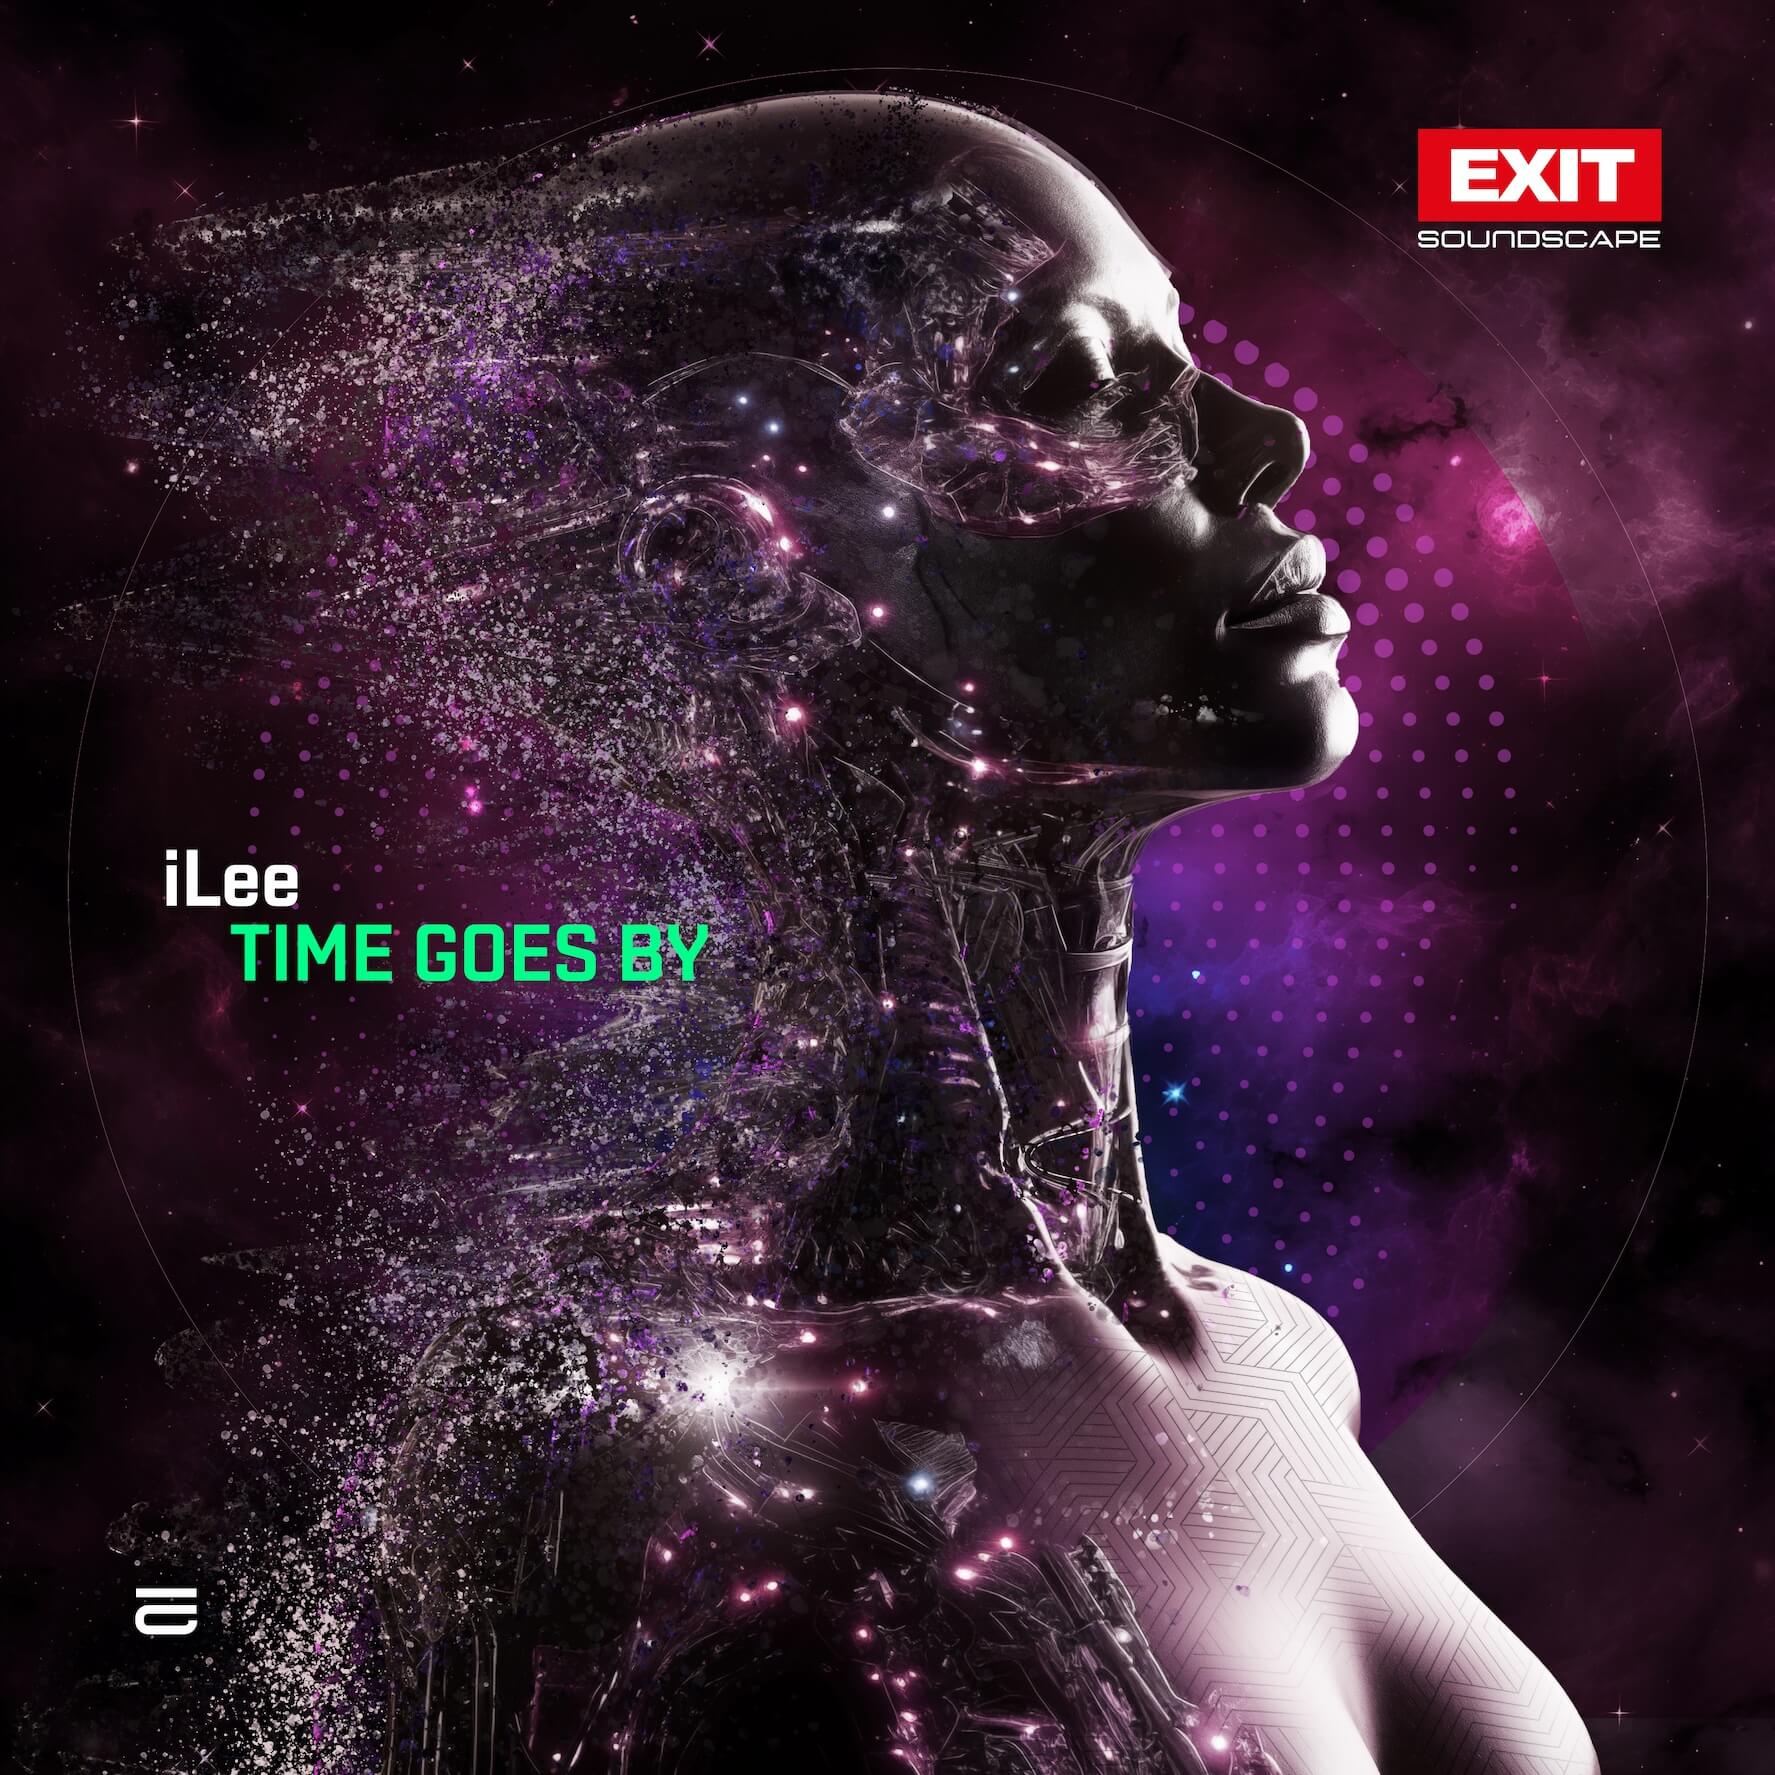 iLEE delivers stunning single, ‘Time Goes By’ via EXIT Soundscape: Listen